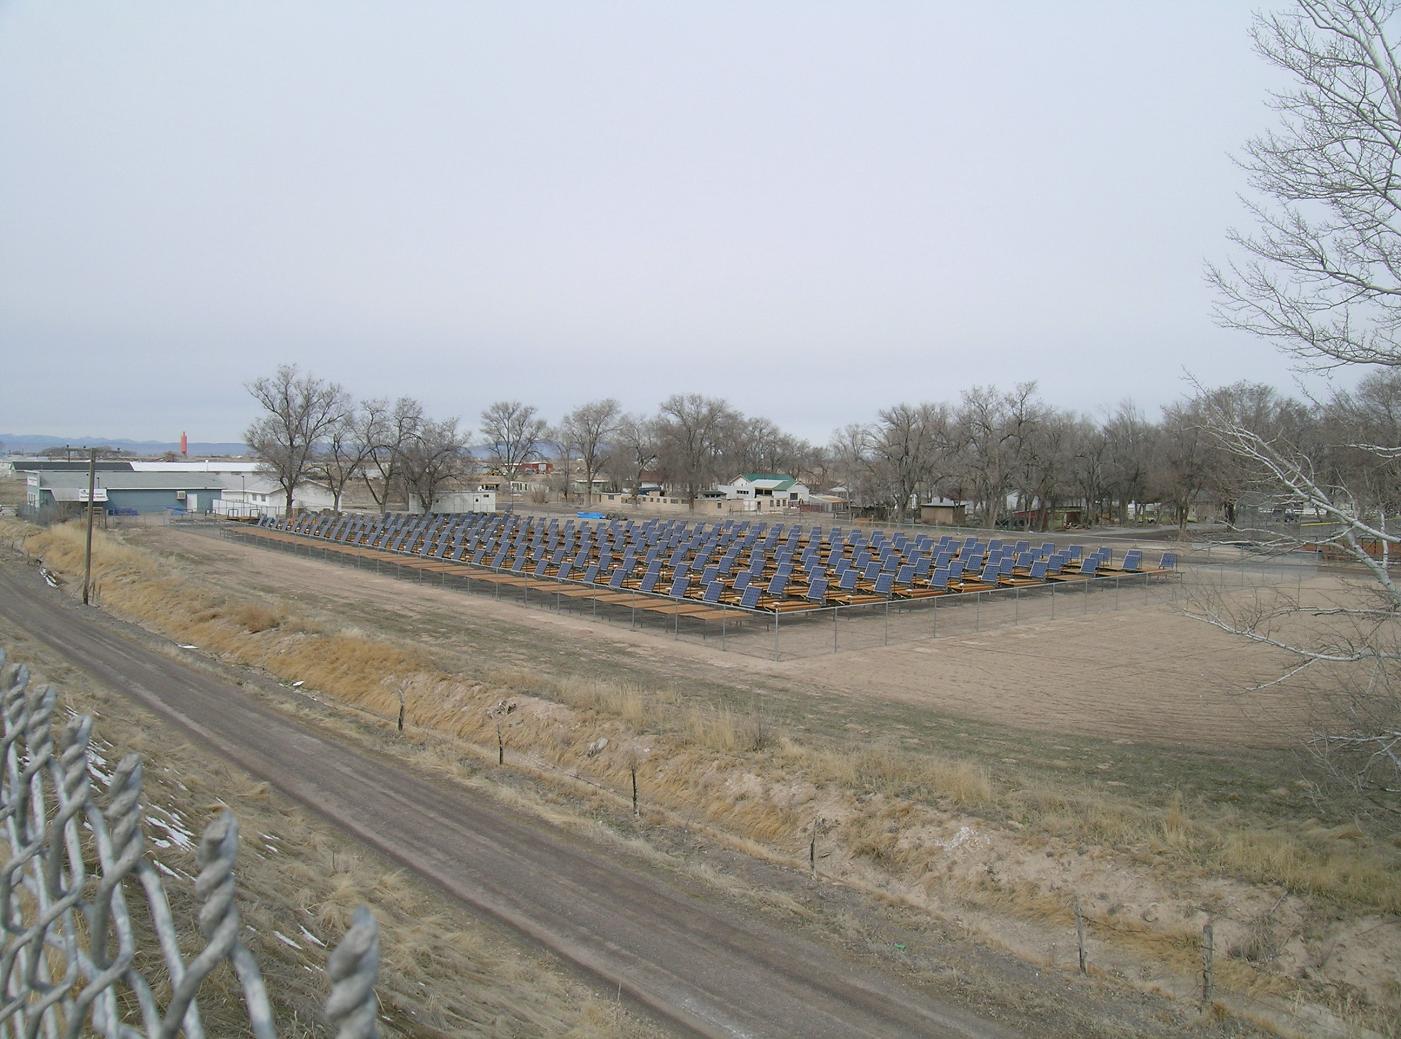 Some 250 scintillation detectors sit in a field in Delta, Utah, while awaiting installation as part of the Telescope Array, a $17 million cosmic ray observatory under construction in the desert of western Utah. The observatory will include 564 scintillation detectors placed in a grid pattern over an 18-mile-by-22-mile area, as well as three buildings containing mirrors known as fluorescence detectors.